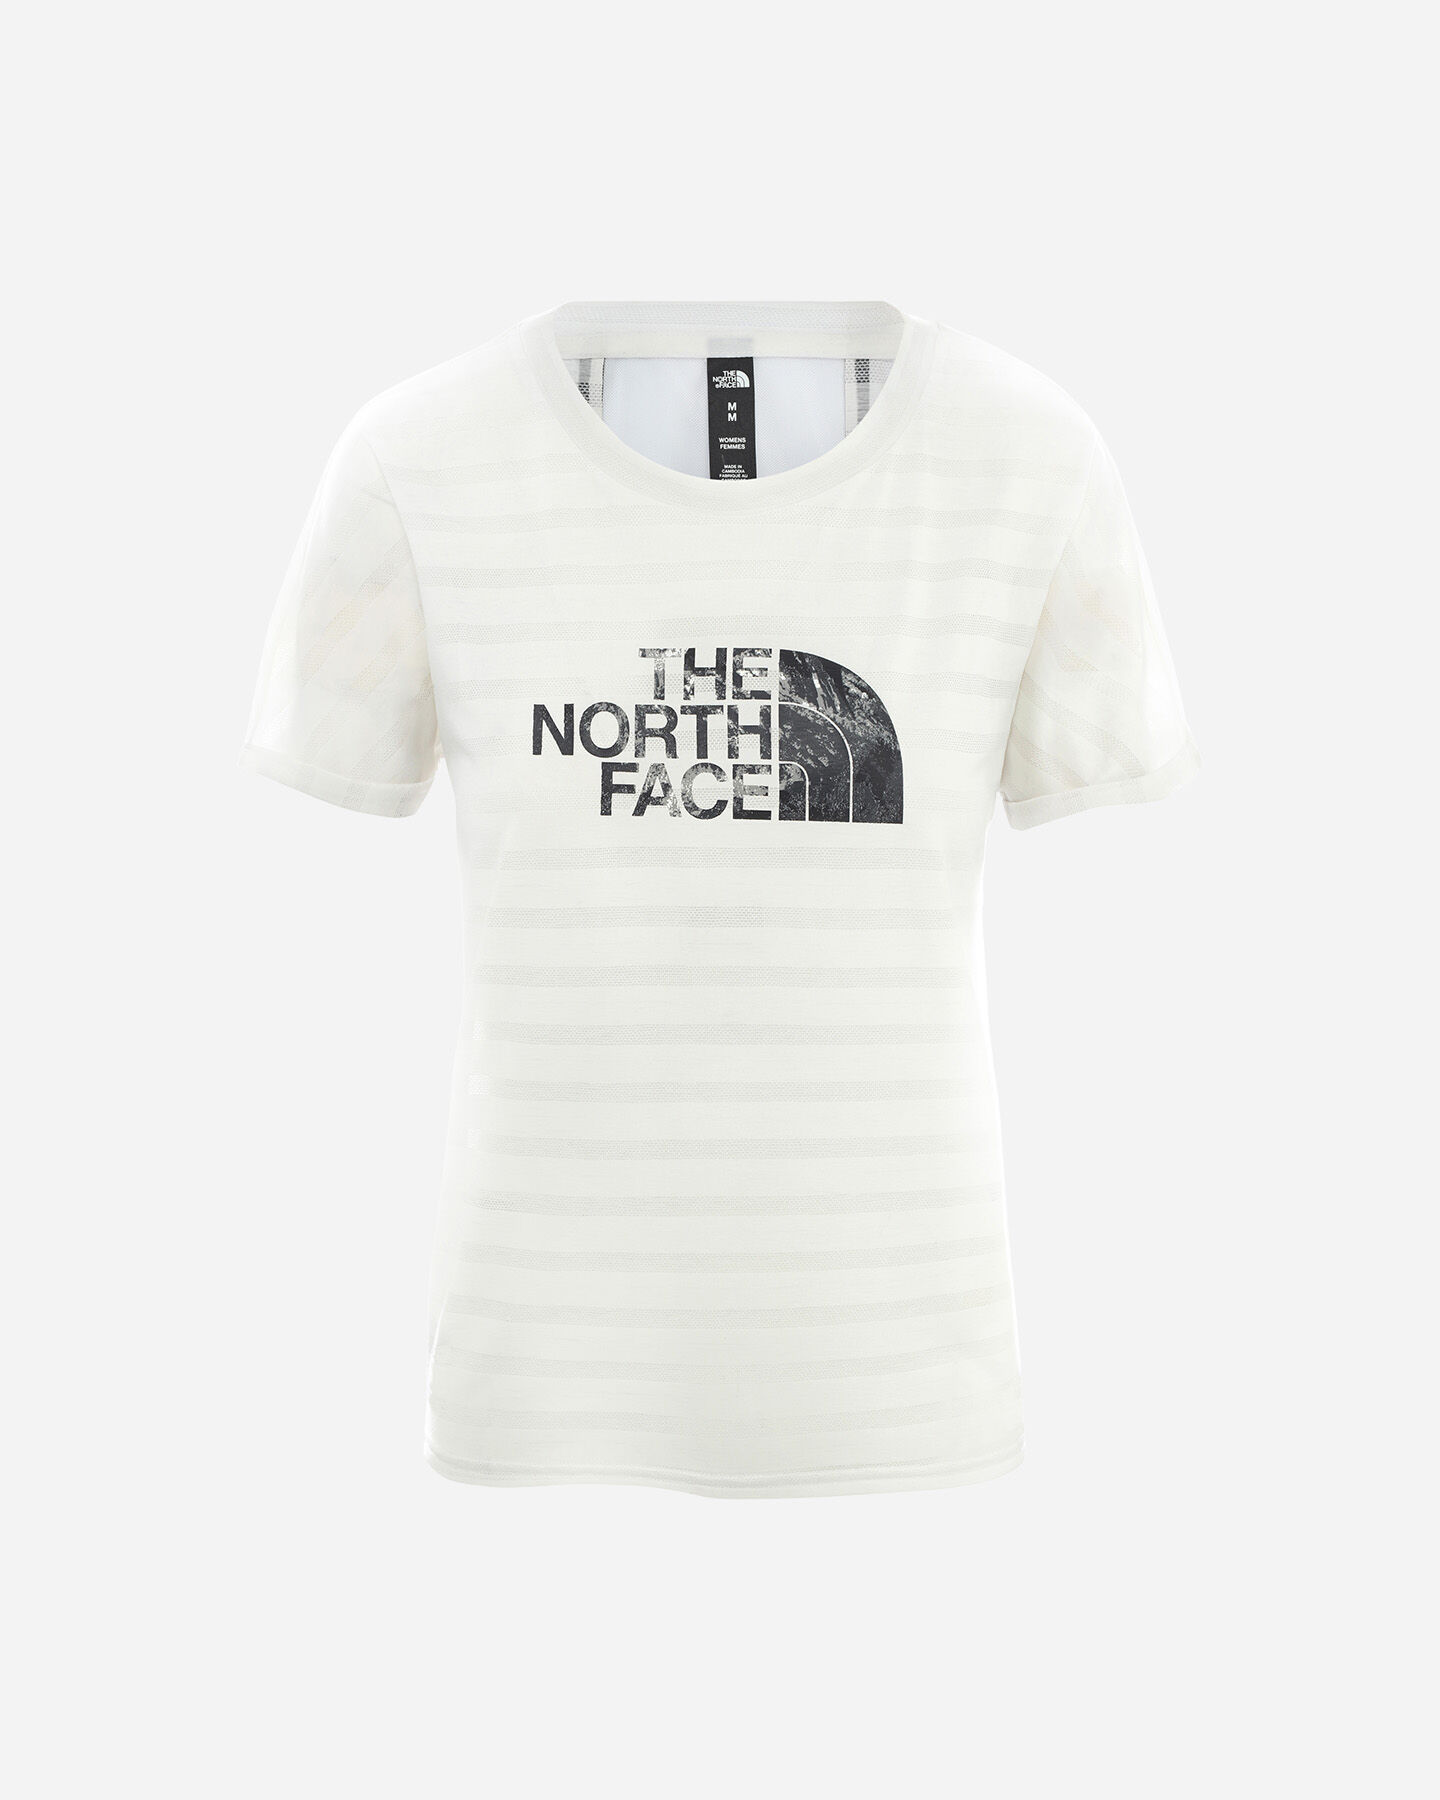  T-Shirt THE NORTH FACE VARUNA W S5192904|FN4|XS scatto 0